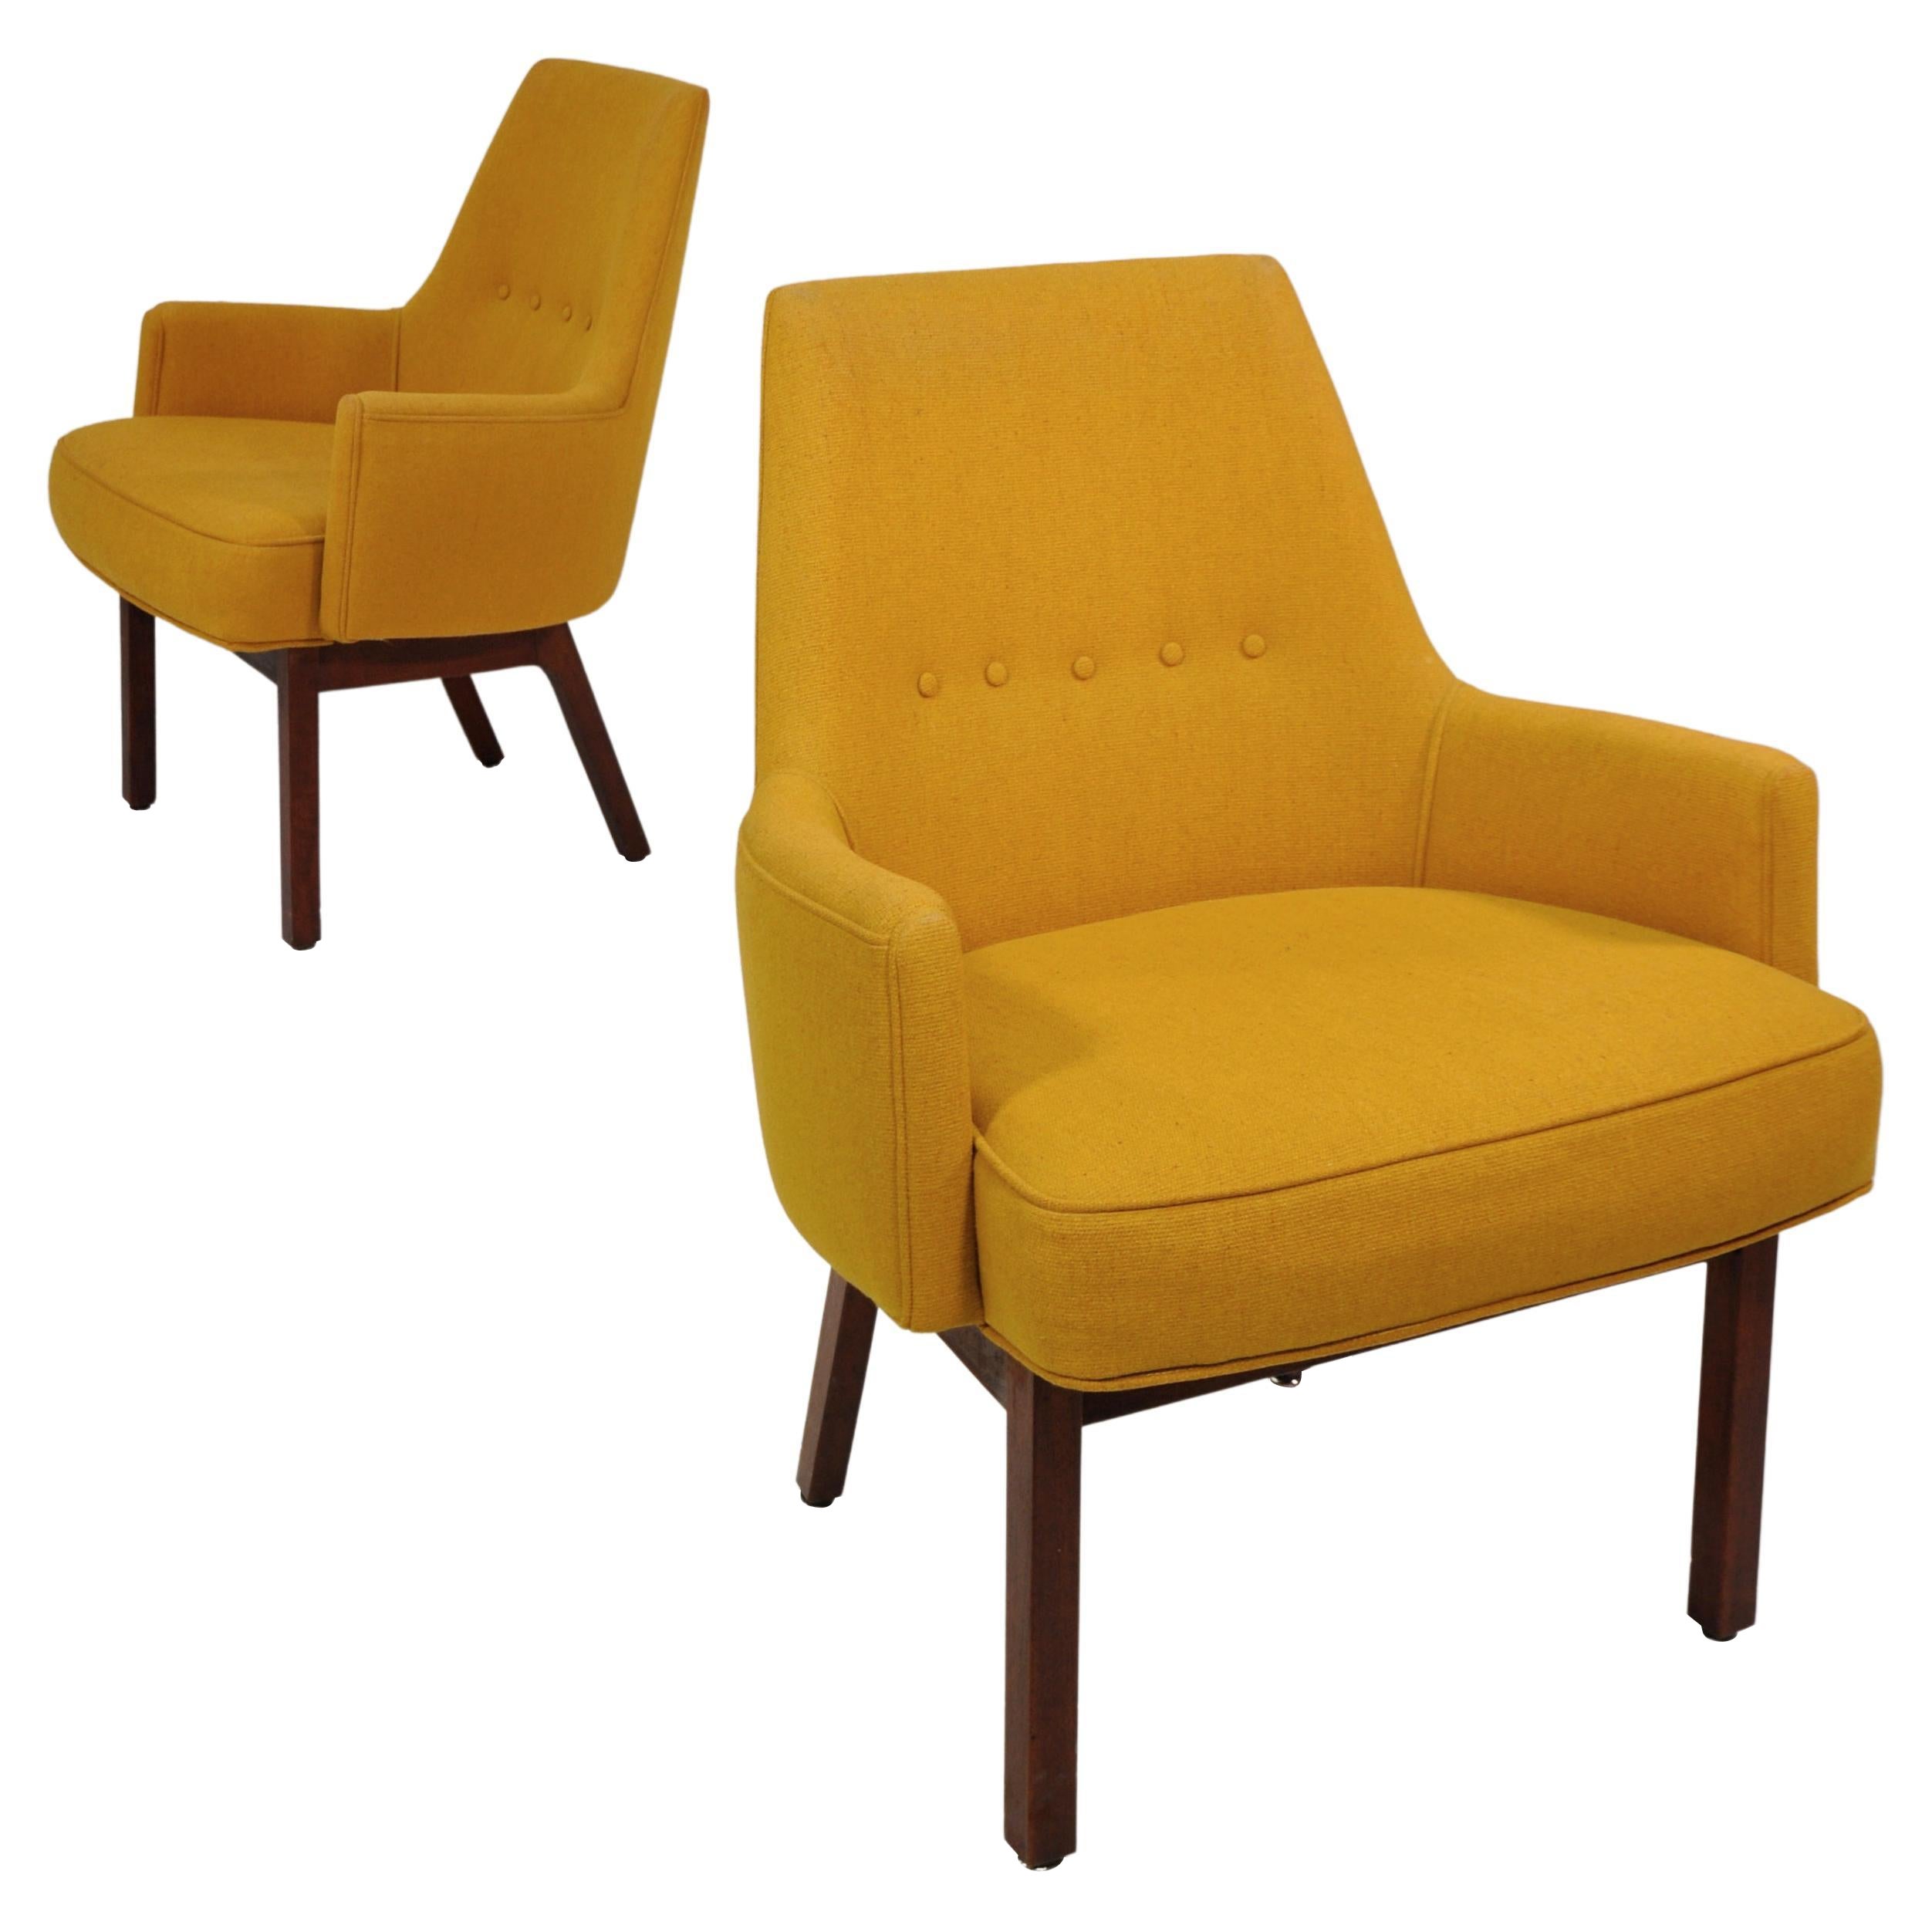 American Yellow Wool Walnut Lounge Chairs by Vista of California, a Pair